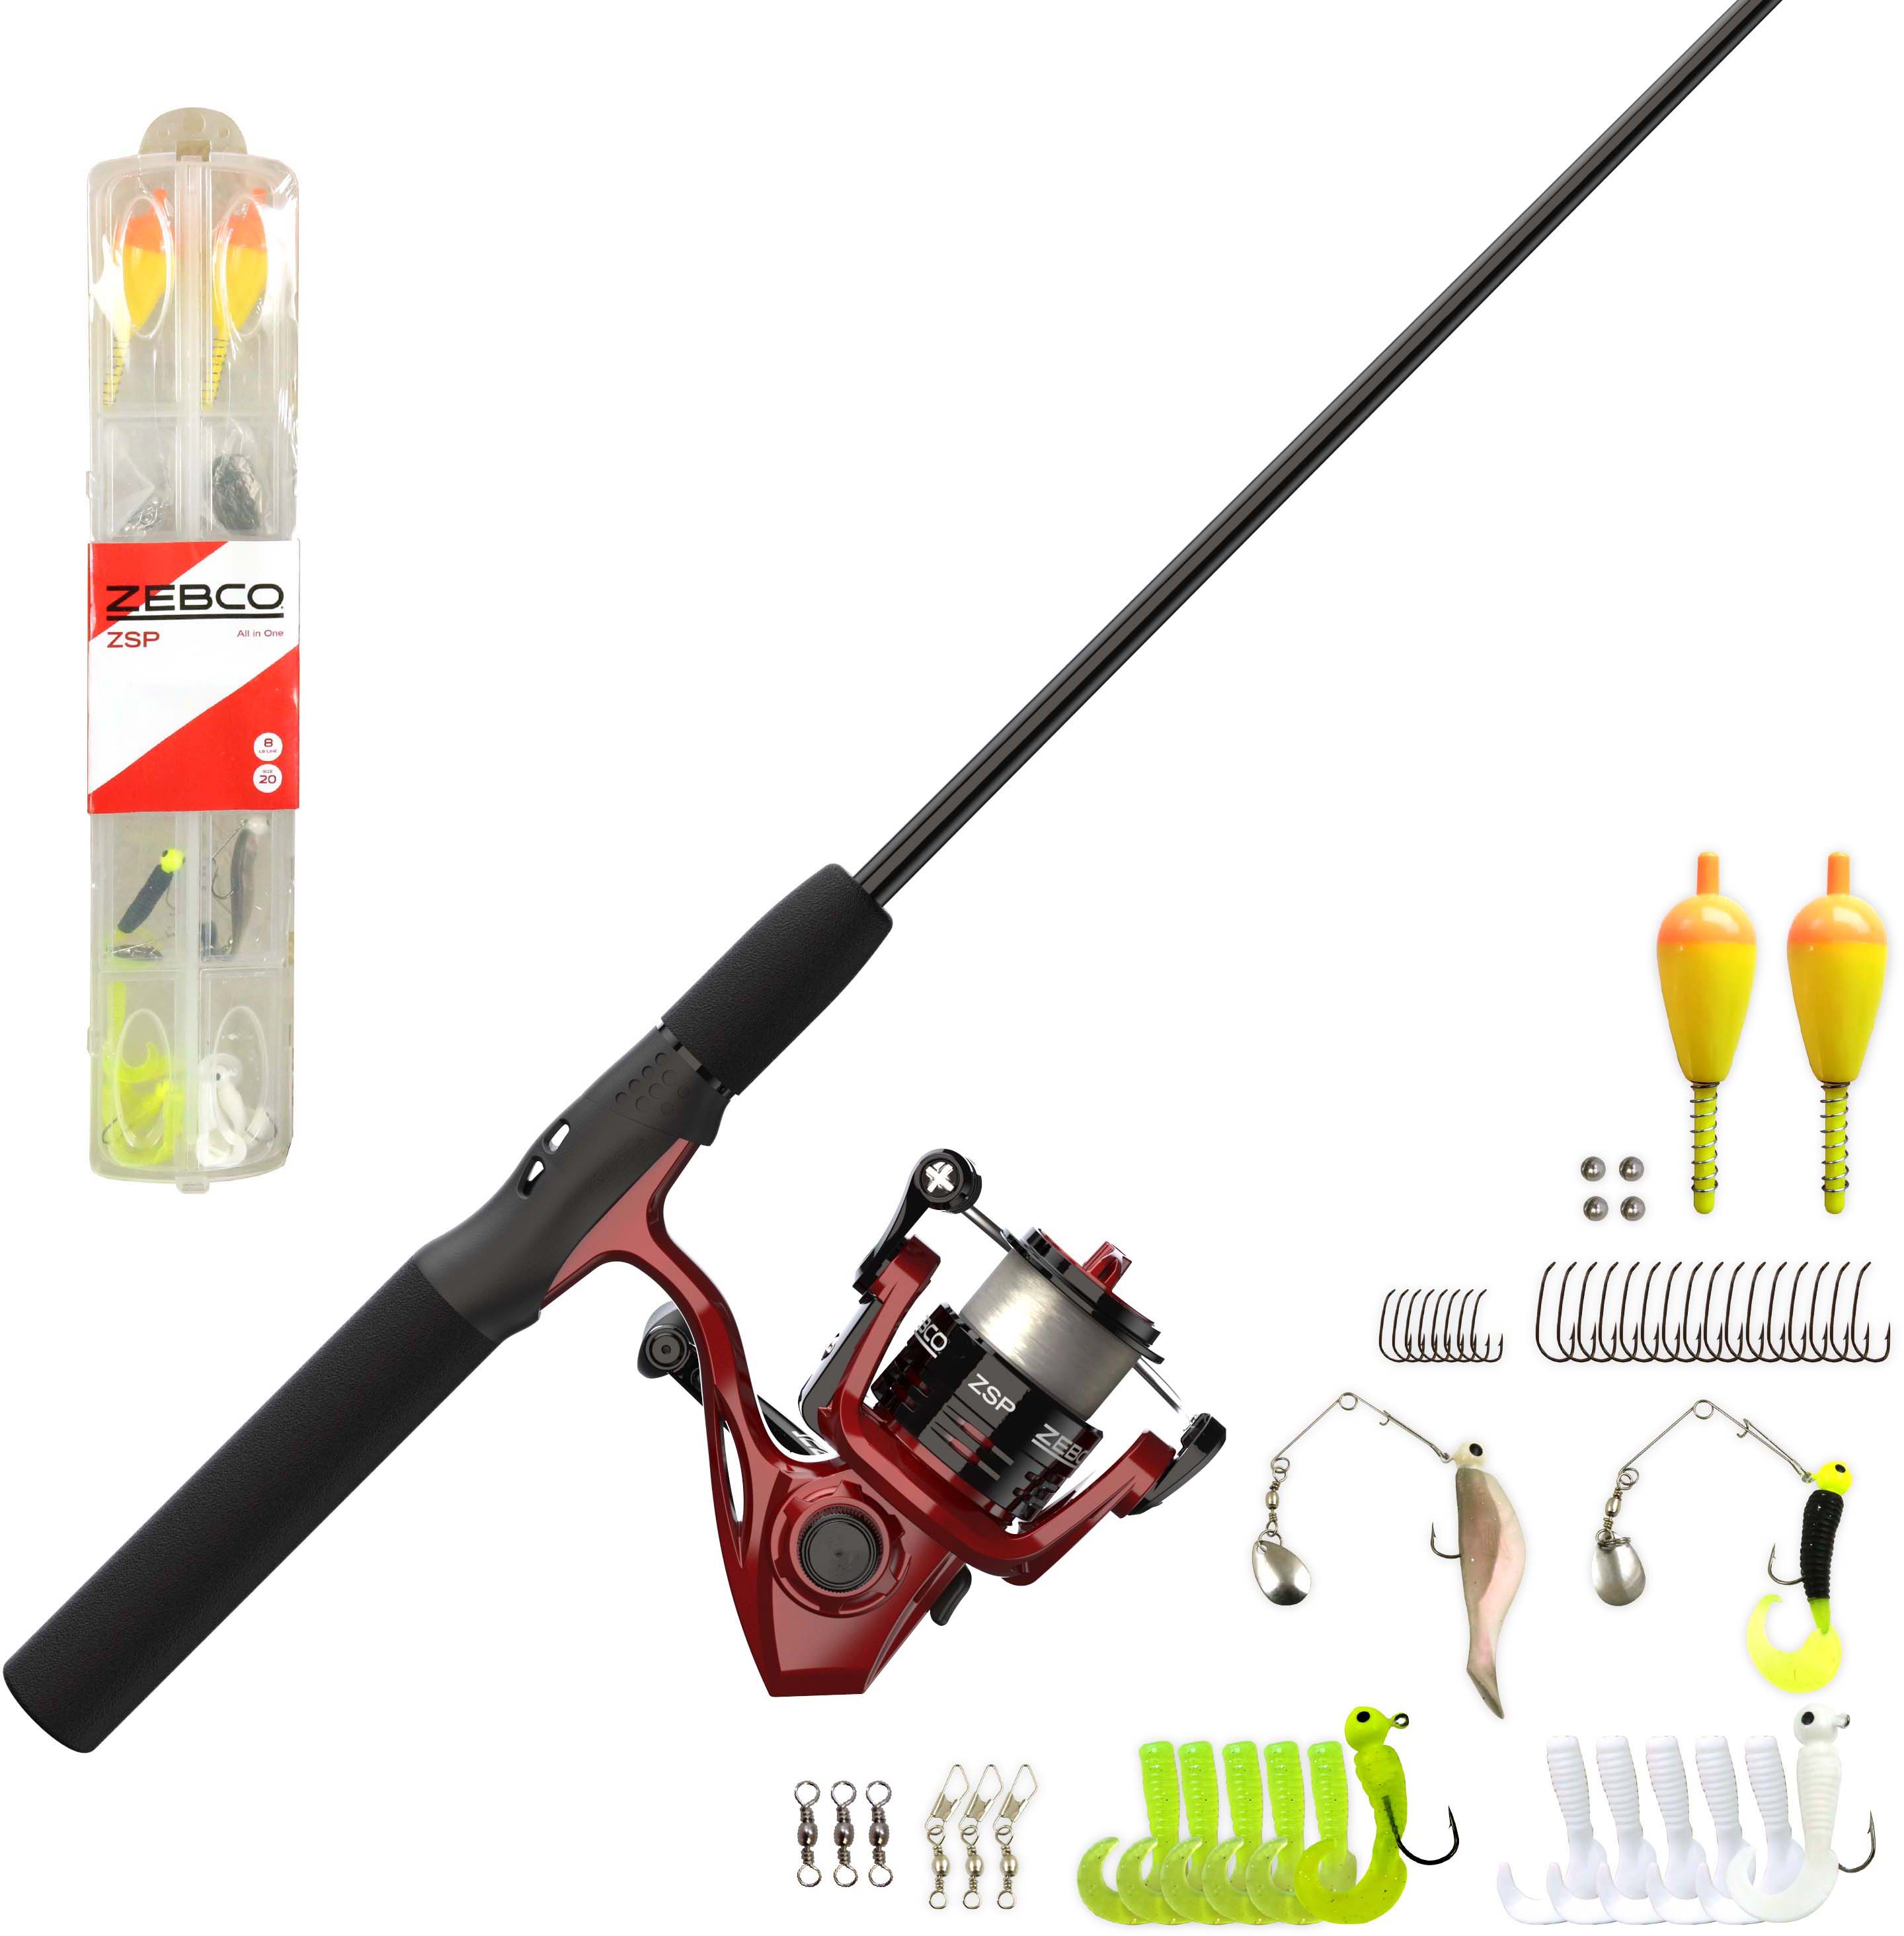 Zebco 33 Rhino Spuncast Combo  Up to 20% Off Free Shipping over $49!